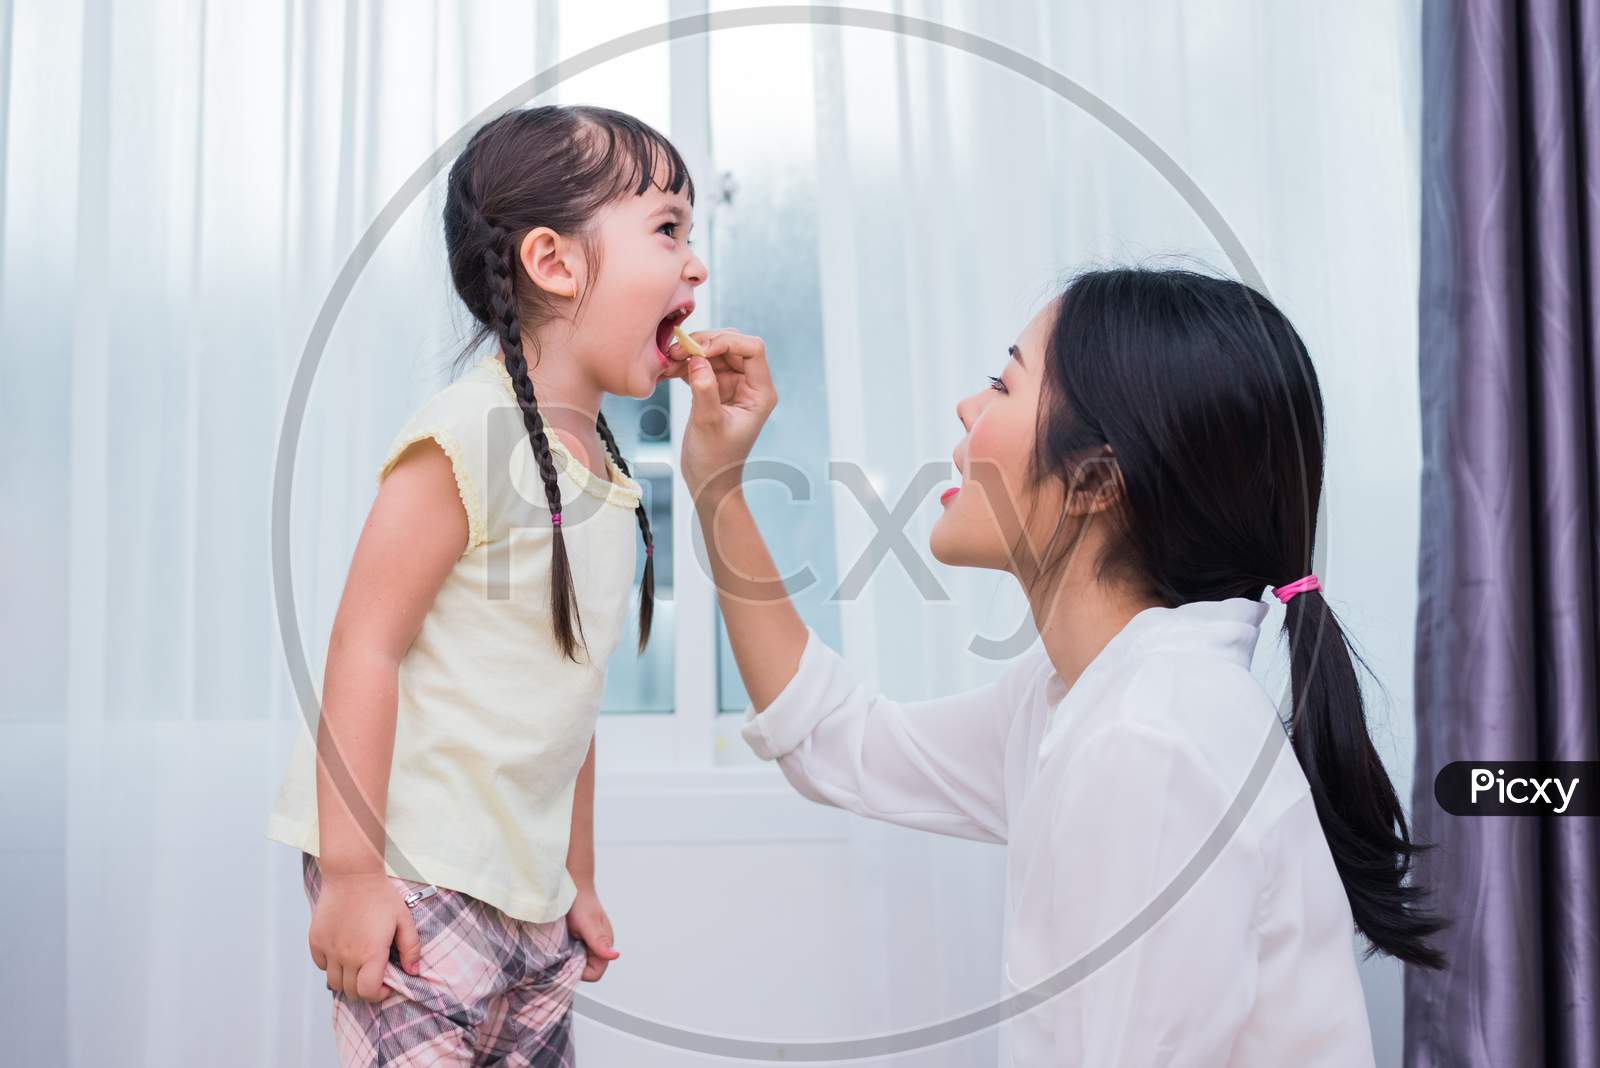 Mom Feeding Kids With Potato Chip. Teacher Feeding Student With Snack. Back To School And Education Concept. Children And Kids Theme. Home Sweet Home And Nursery Theme.